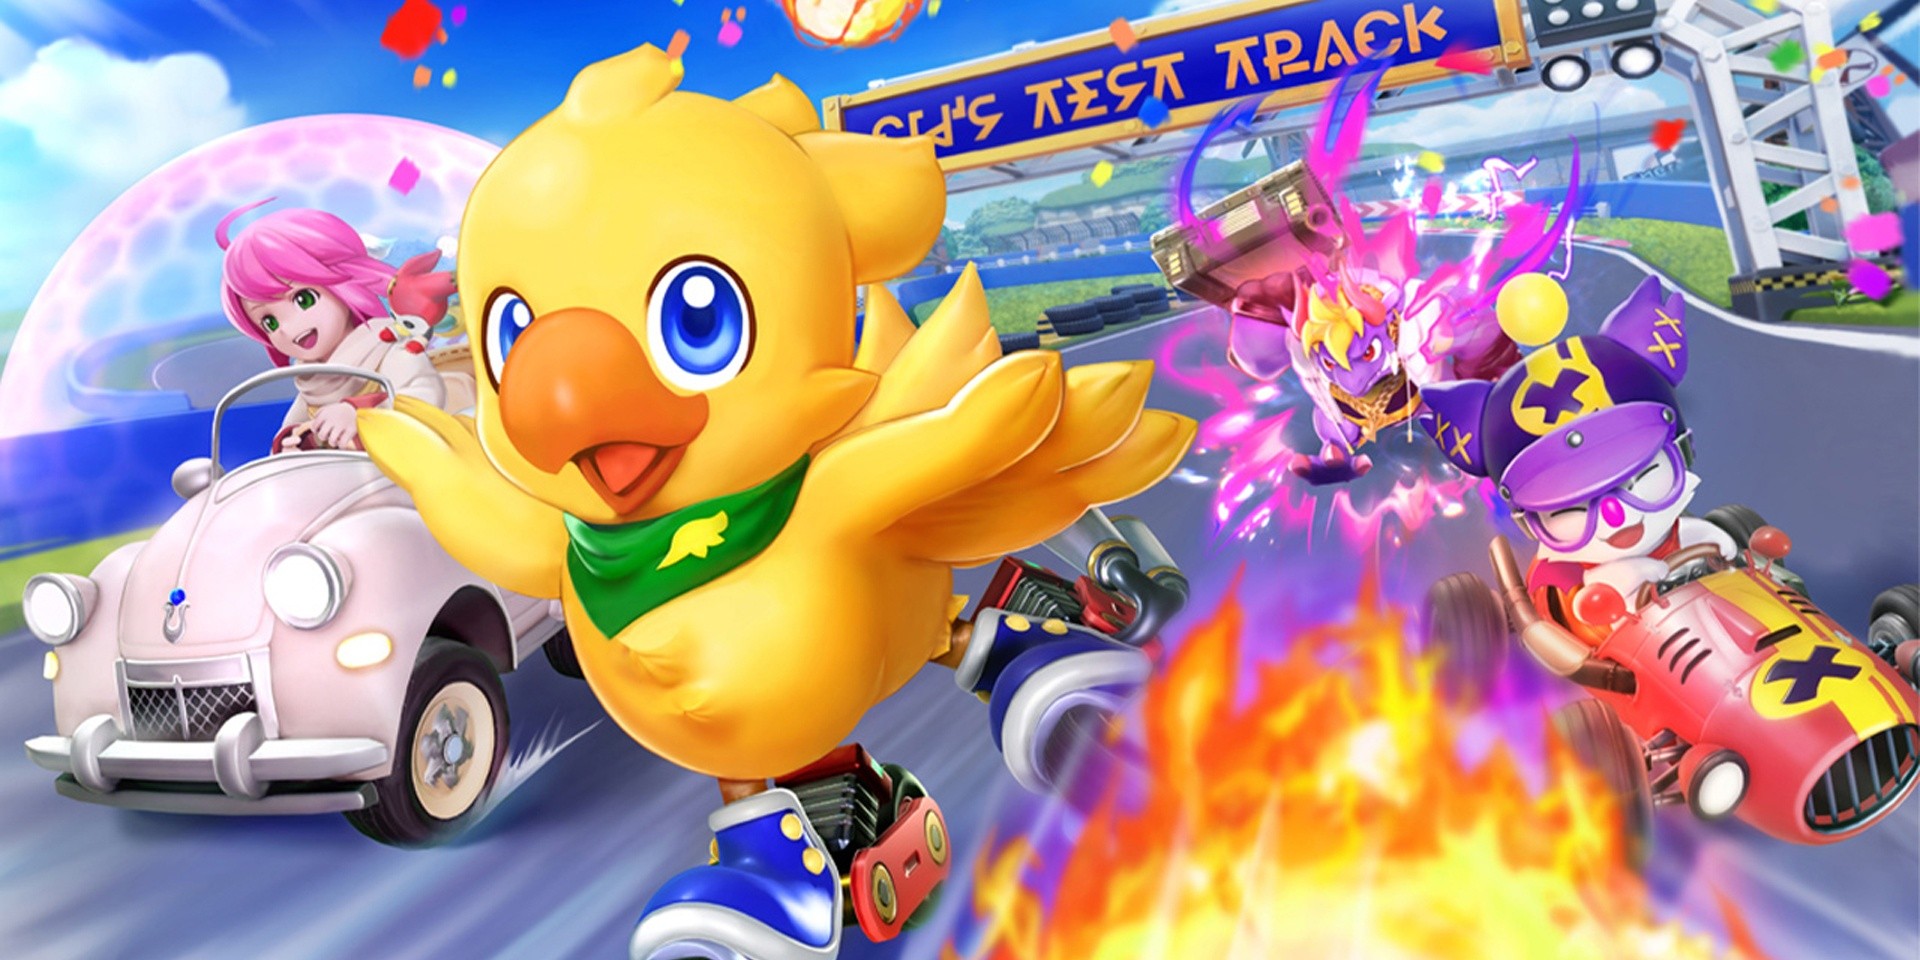 Hit the race track with your favorite Final Fantasy characters on Chocobo GP